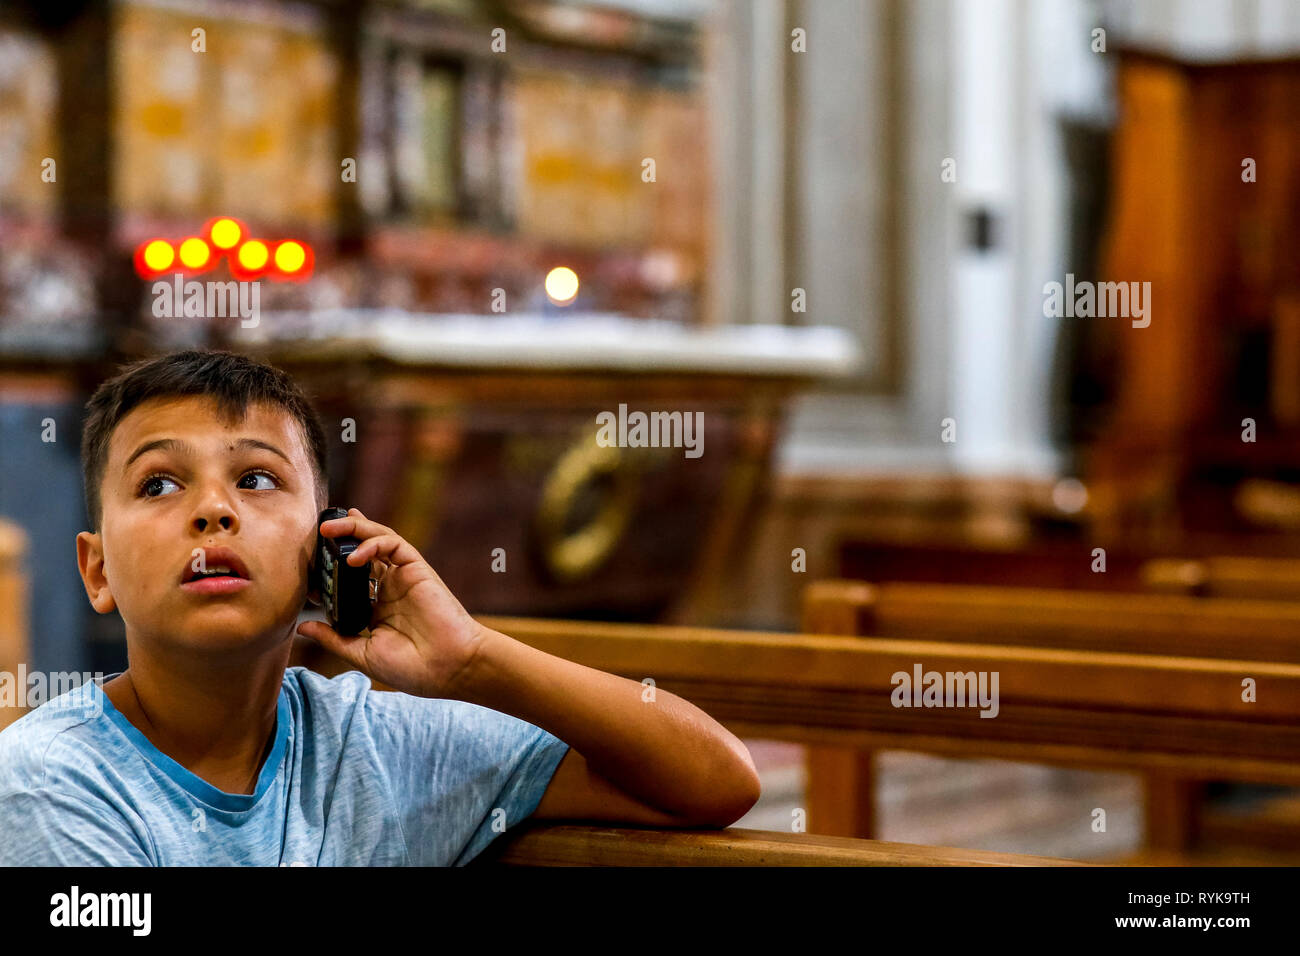 12-year-old boy using an audioguide in a church in Catania, Sicily (Italy). Stock Photo